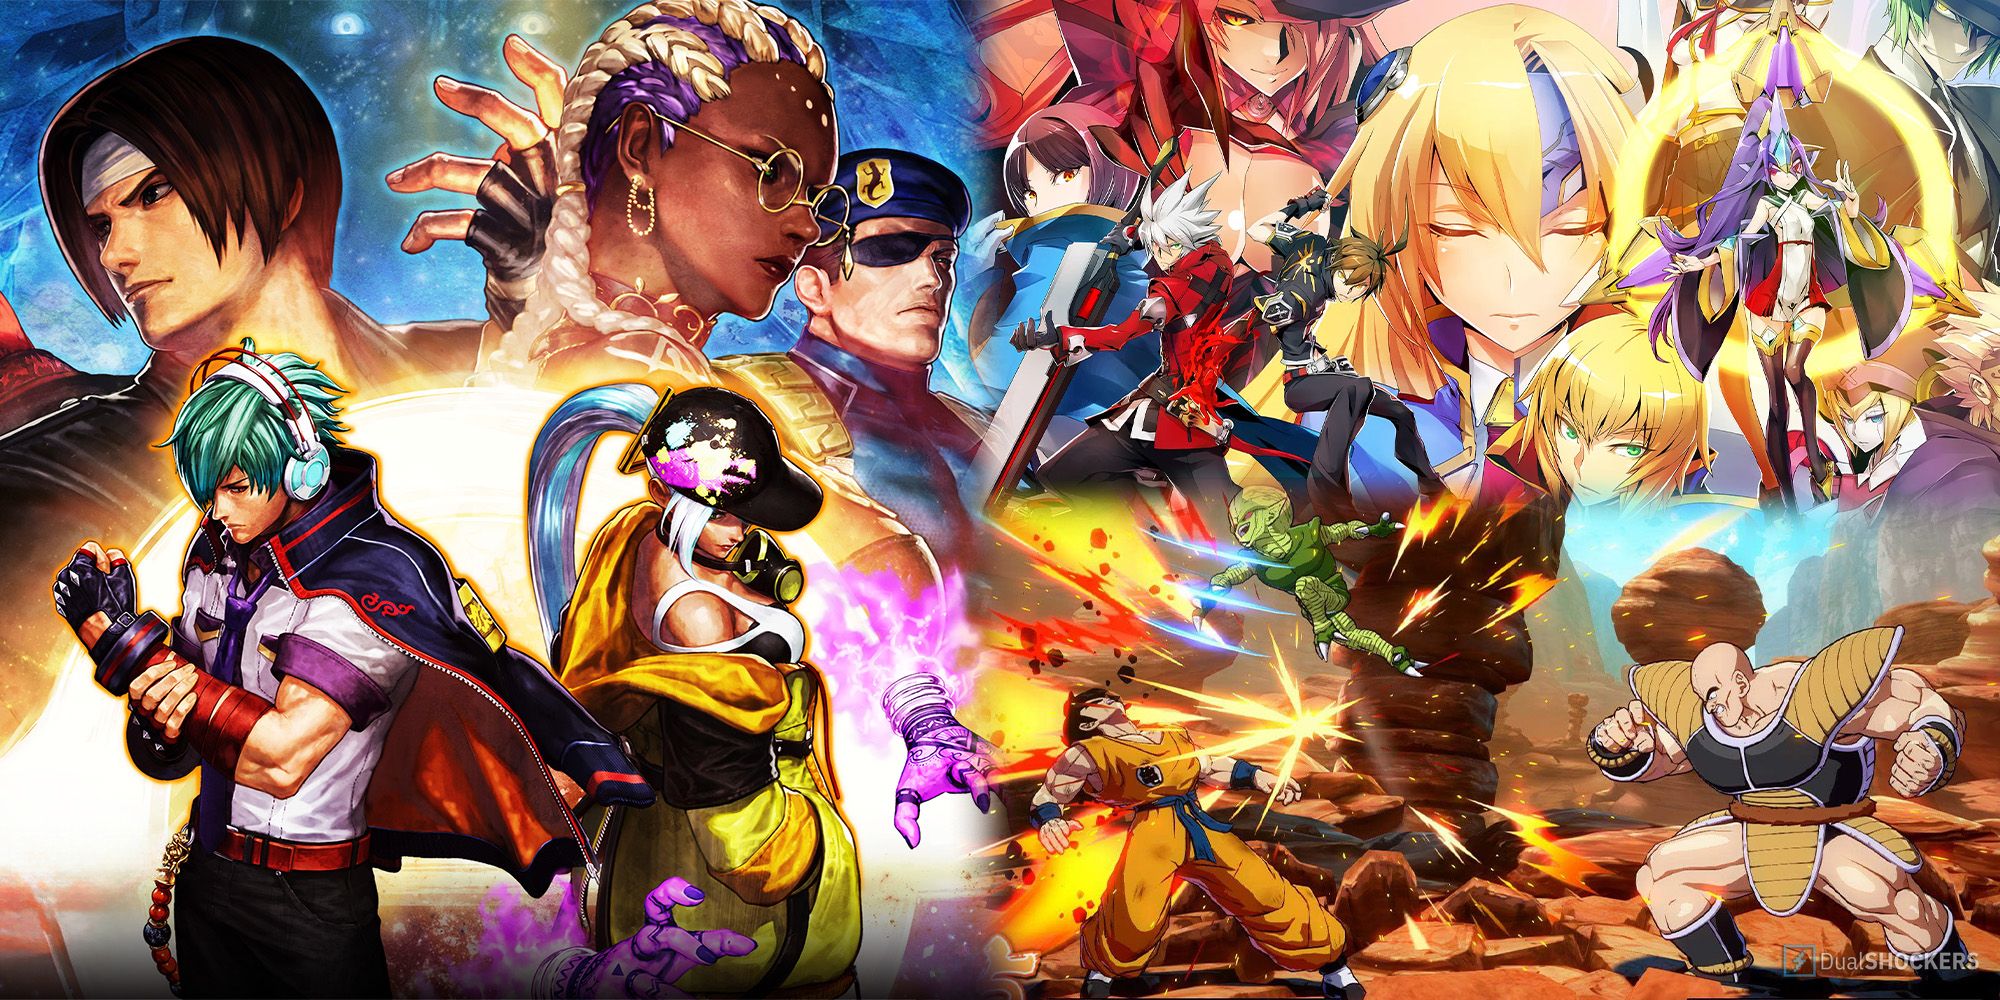 Genshin Impact: Top 5 anime-based RPG games that you should try out in 2023